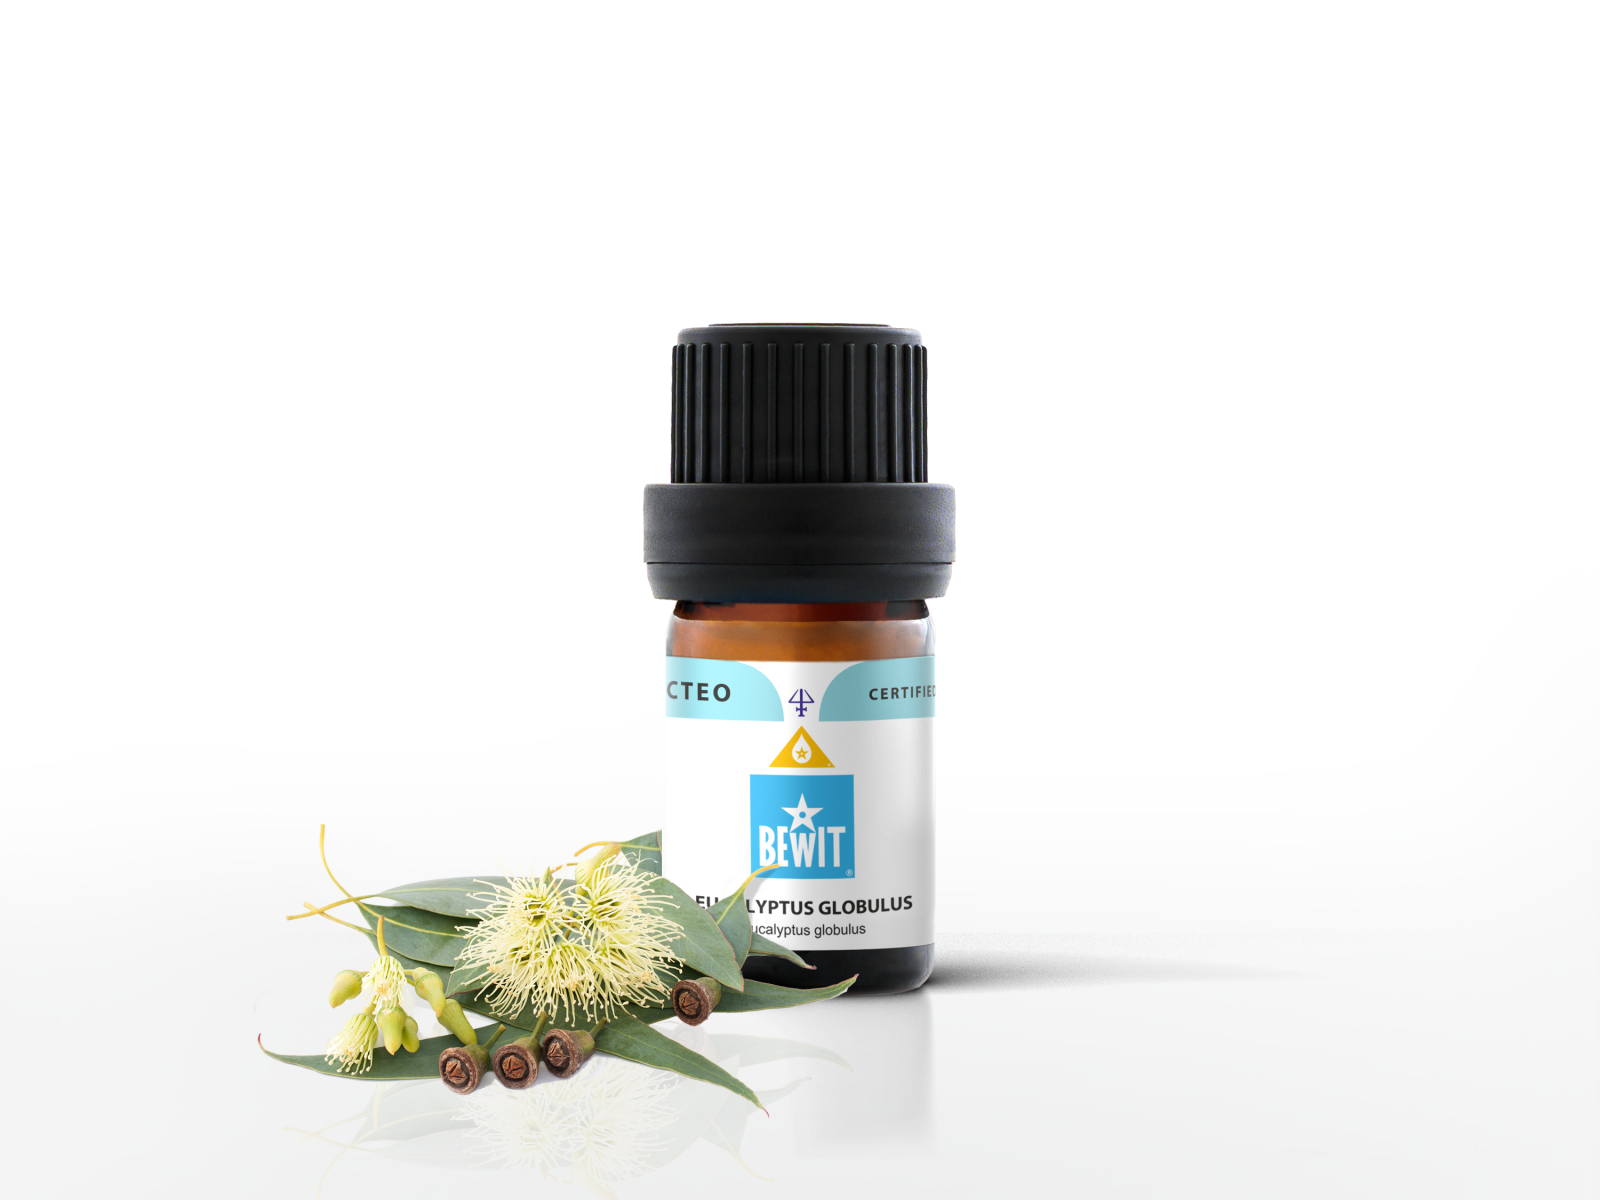 BEWIT Eucalyptus globulus - This is a 100% pure essential oil - 2